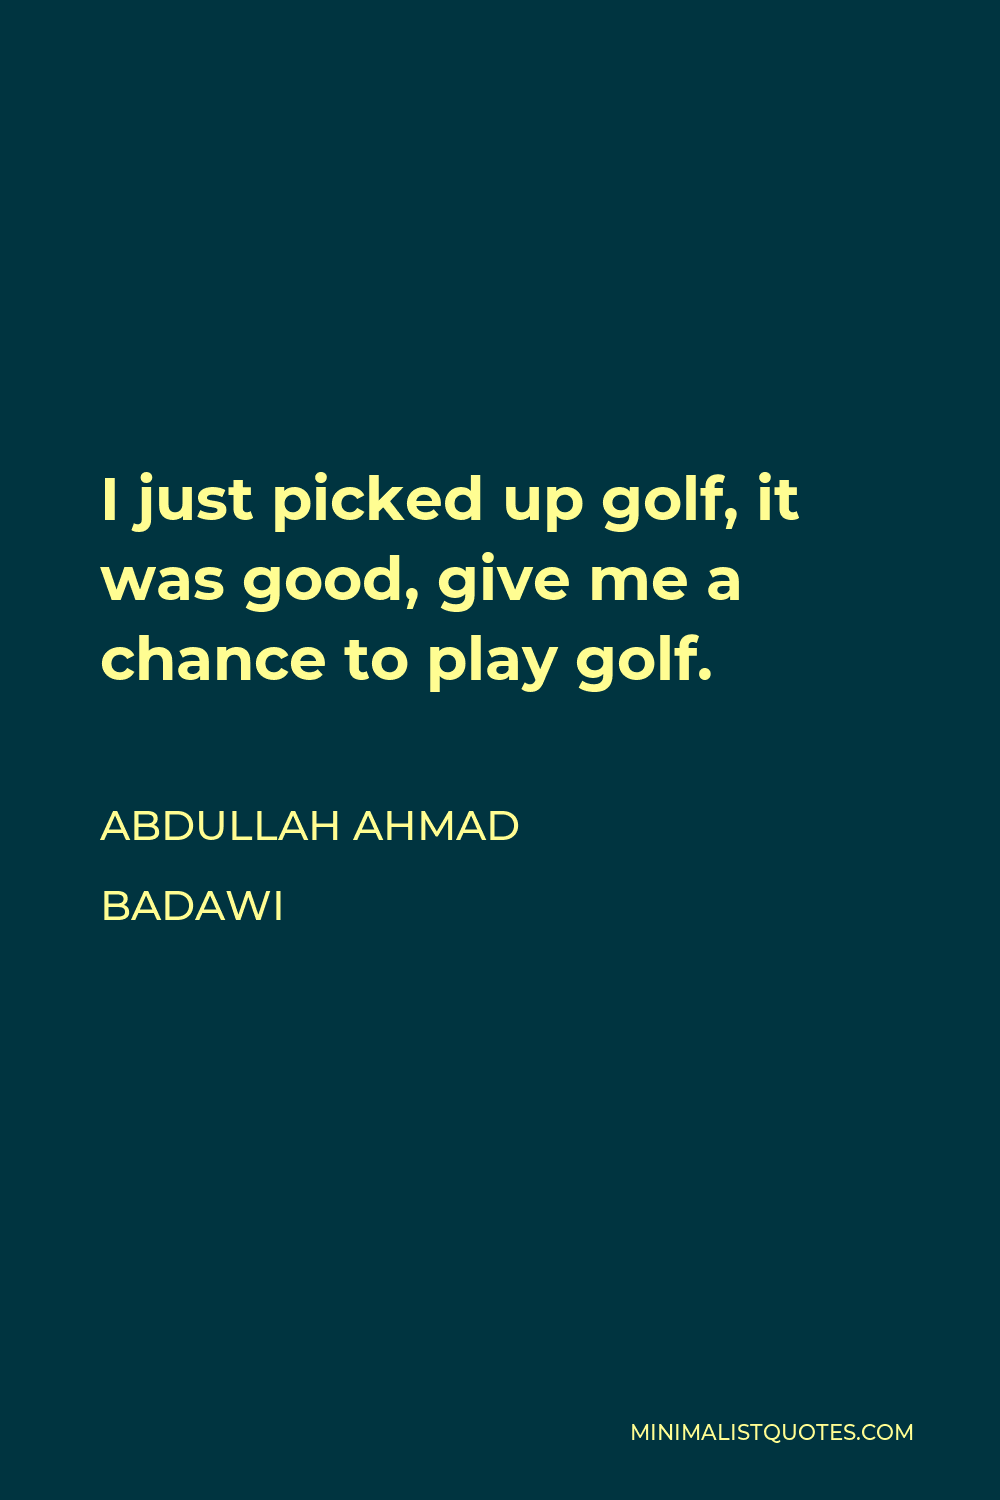 Abdullah Ahmad Badawi Quote - I just picked up golf, it was good, give me a chance to play golf.